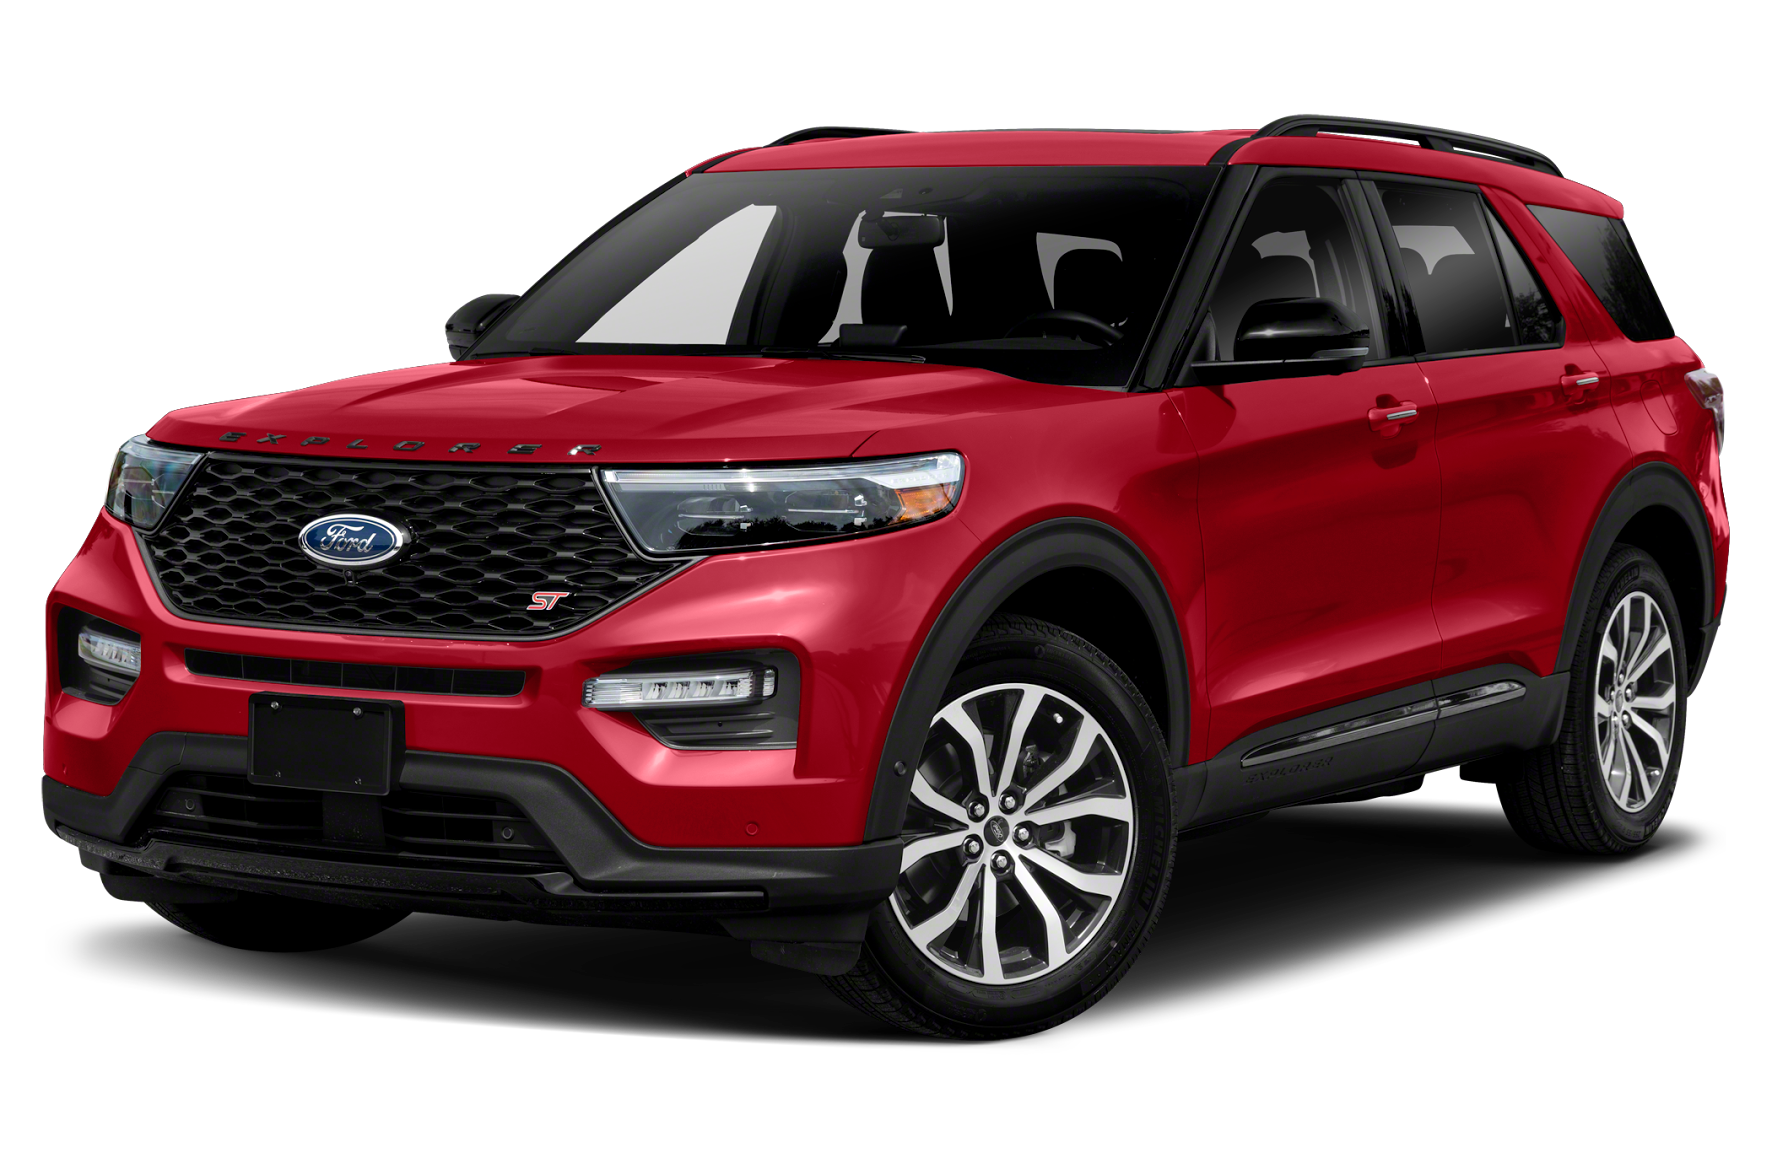 2020 Ford Explorer ST Review